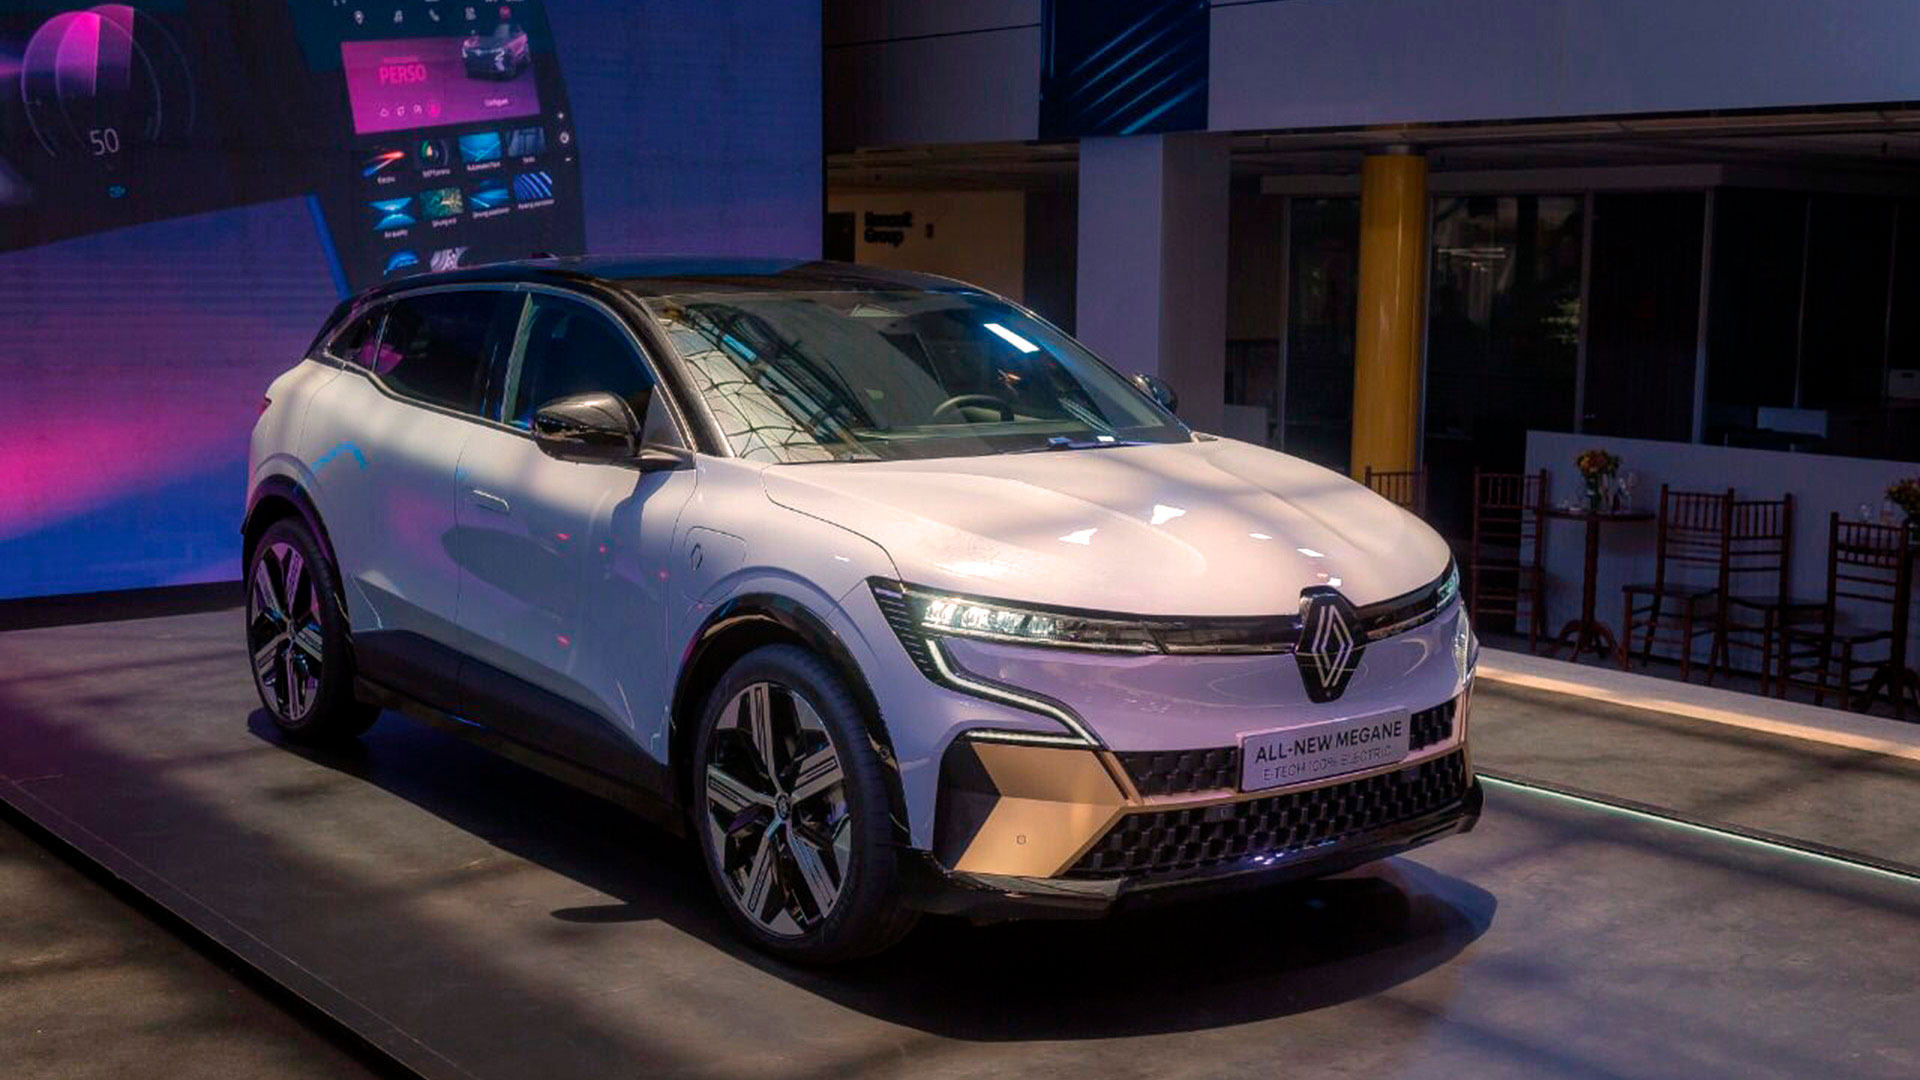 El Renault Mégane E-Tech en la sede central de Renault Argentina. It will be one of three 100% electric models arriving in the country later this year.